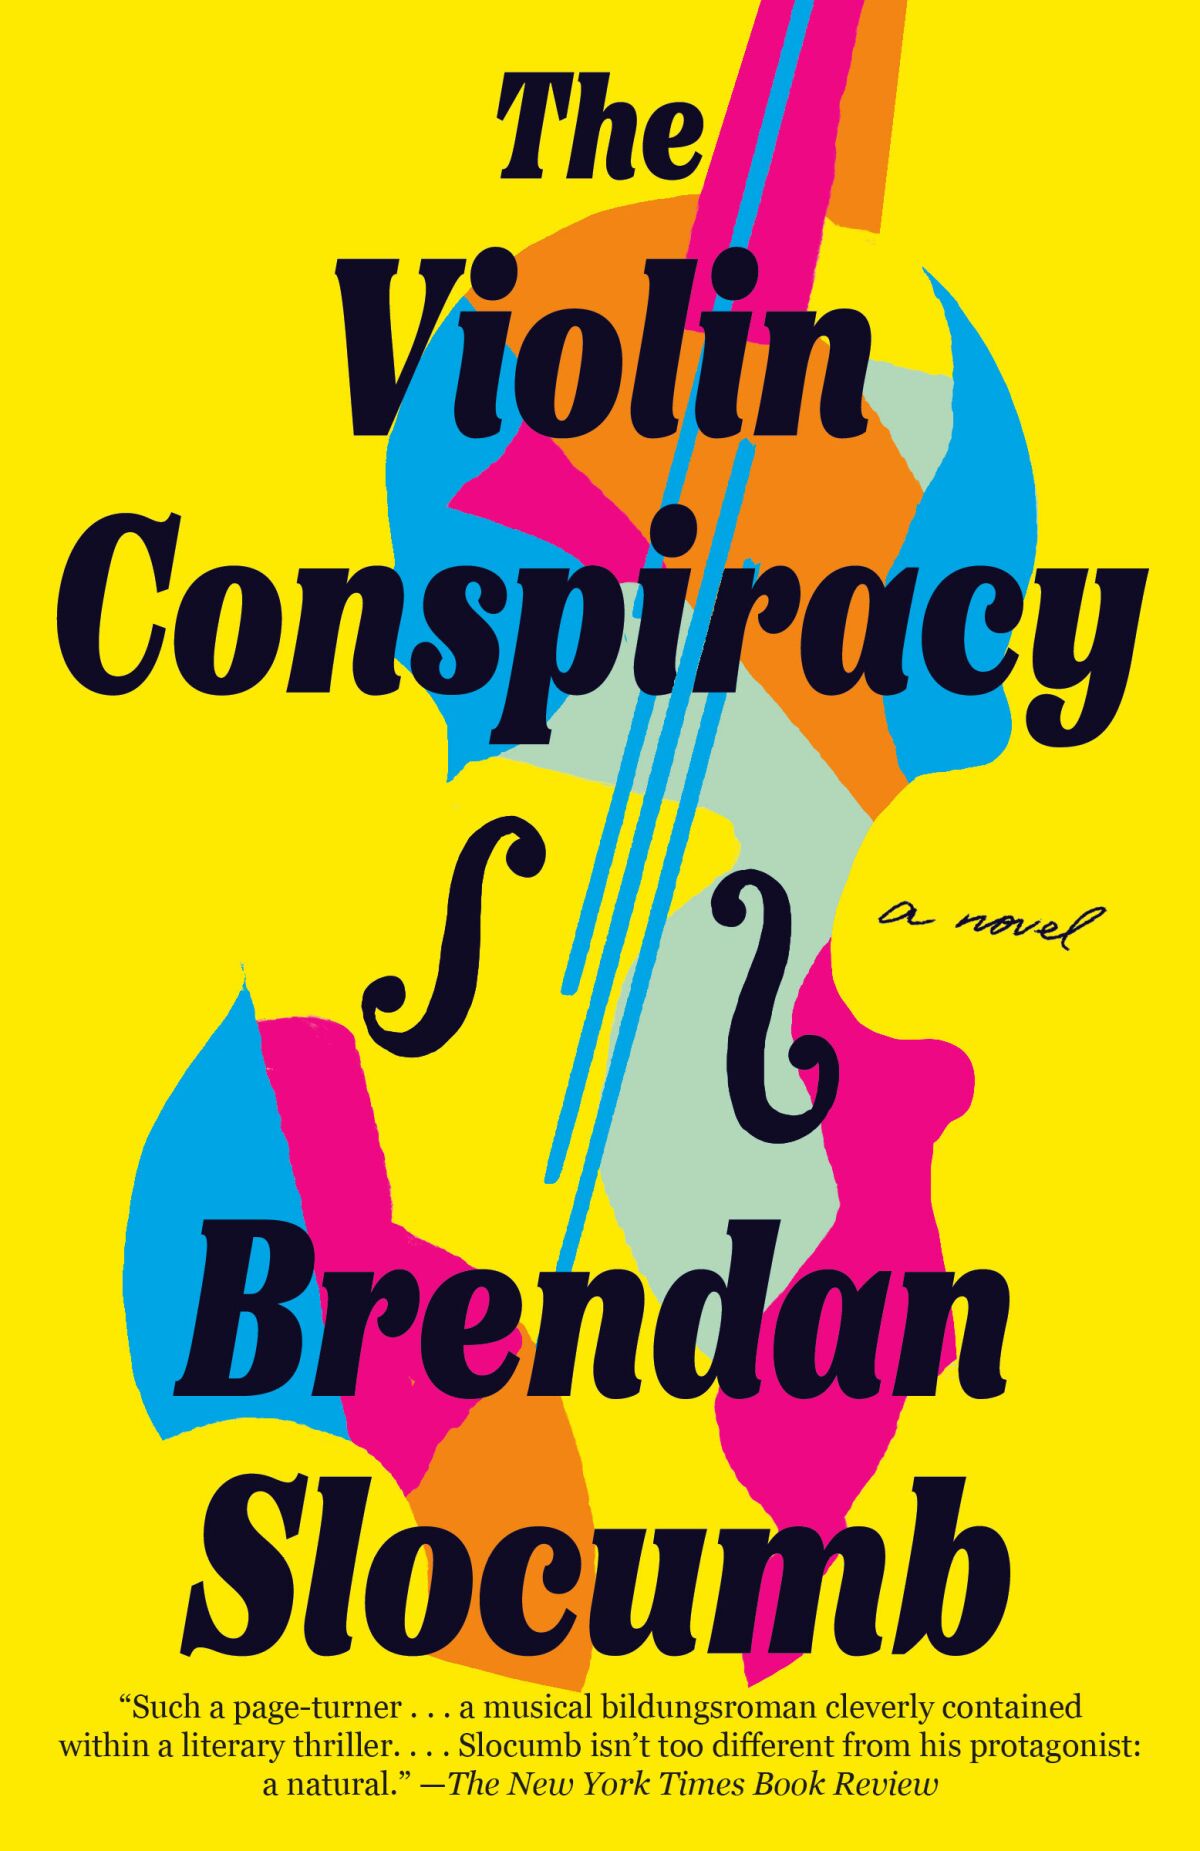 book cover for "The Violin Conspiracy" by Brendan Slocumb. paperback edition.